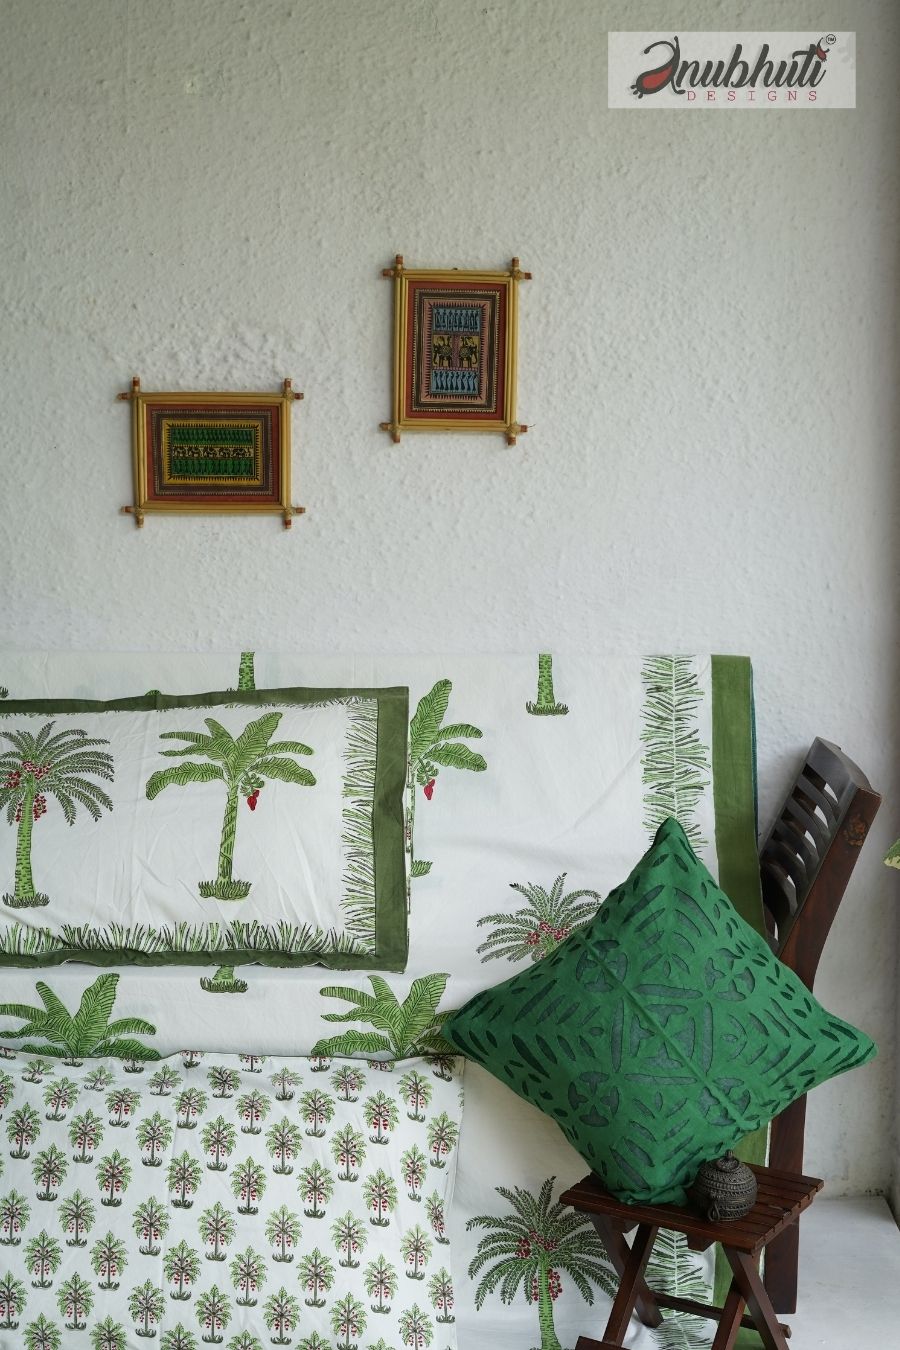 Hand Block Printed Bedcover With Applique Cushion